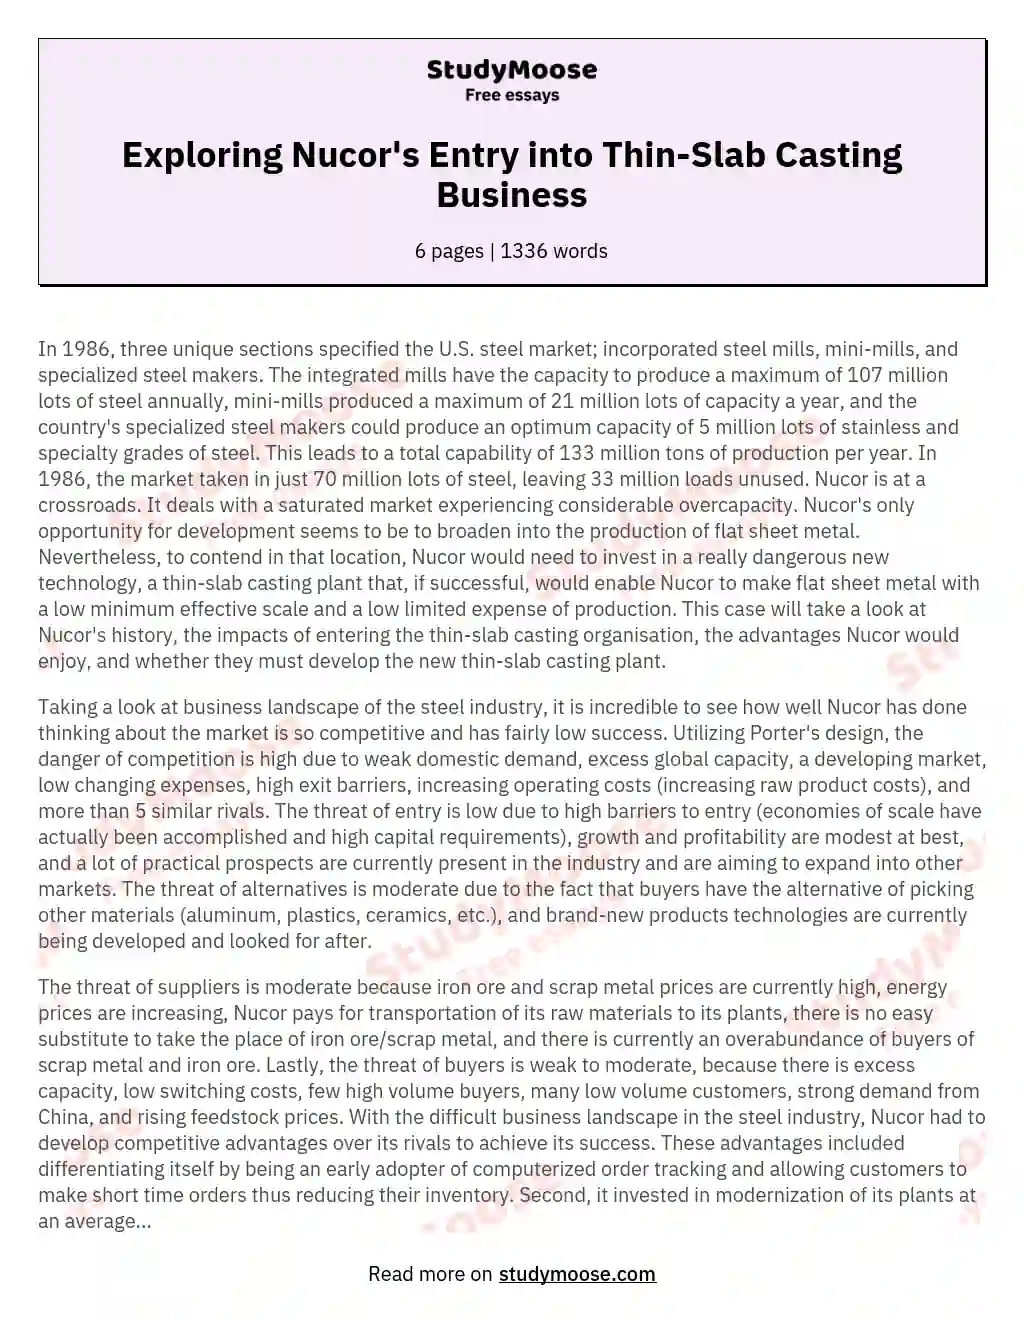 Exploring Nucor's Entry into Thin-Slab Casting Business essay